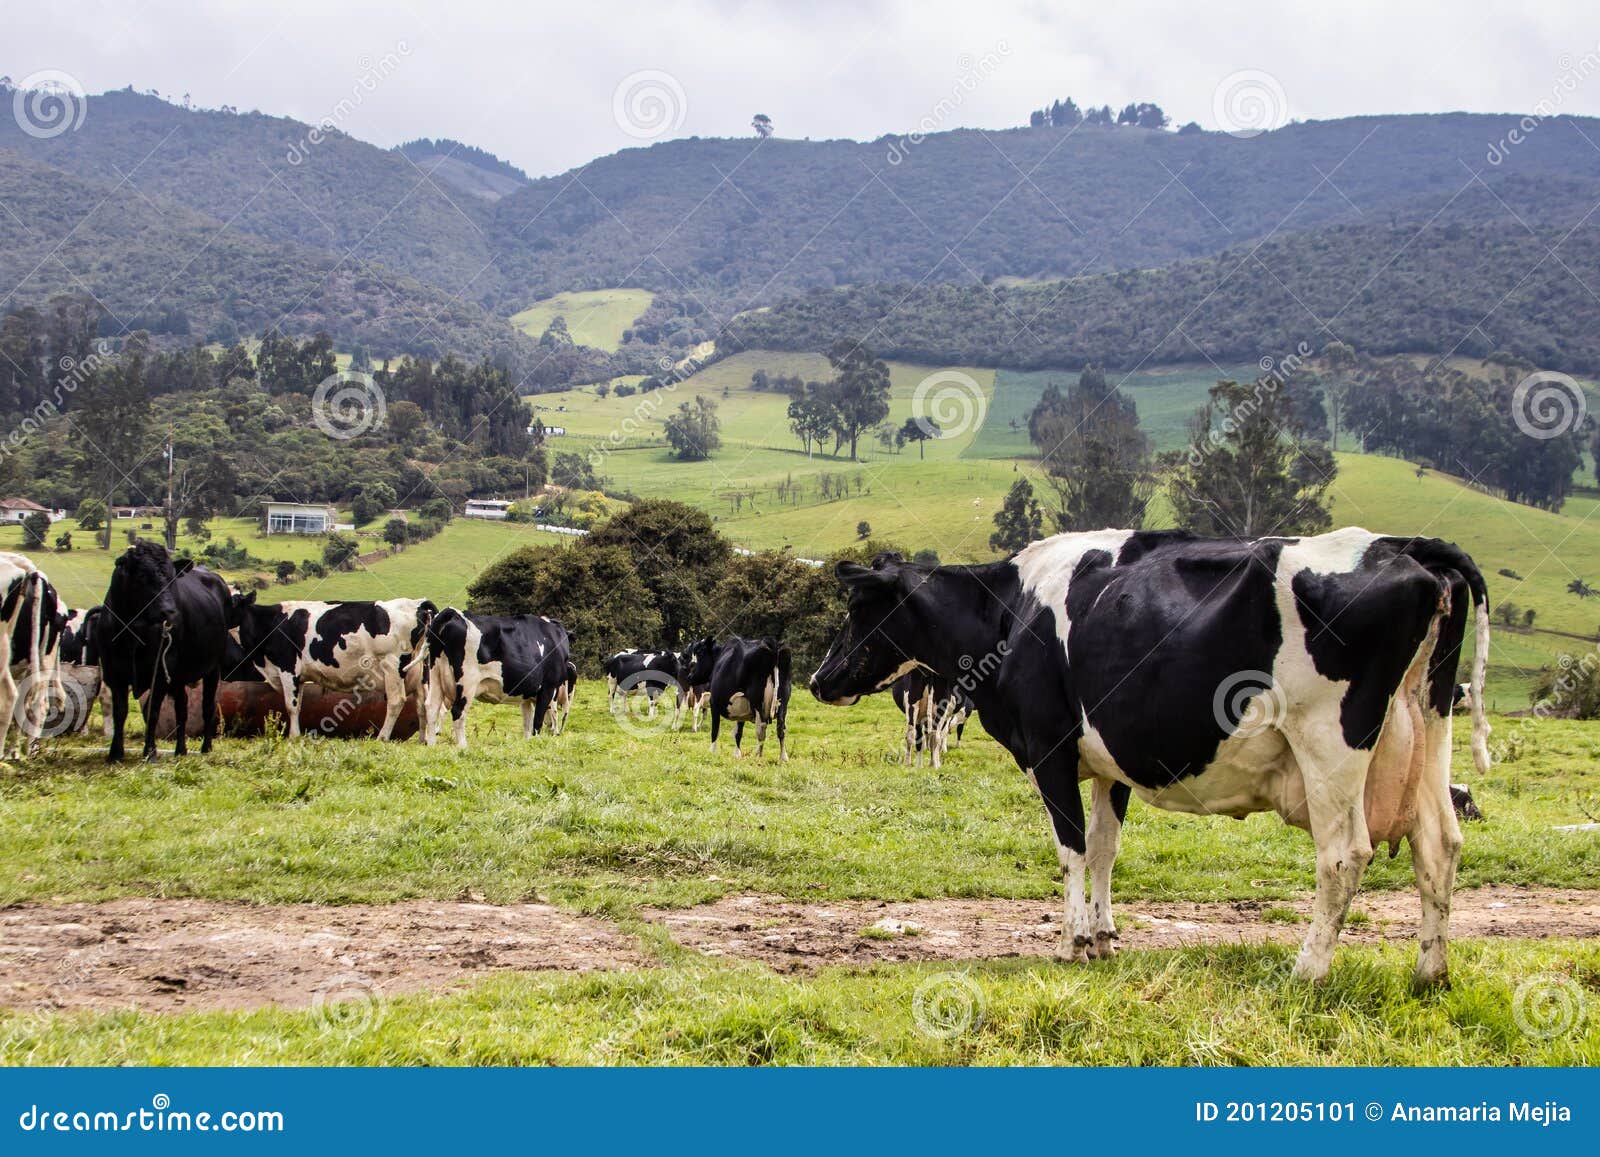 herd of dairy cattle in la calera in the department of cundinamarca close to the city of bogotÃÂ¡ in colombia